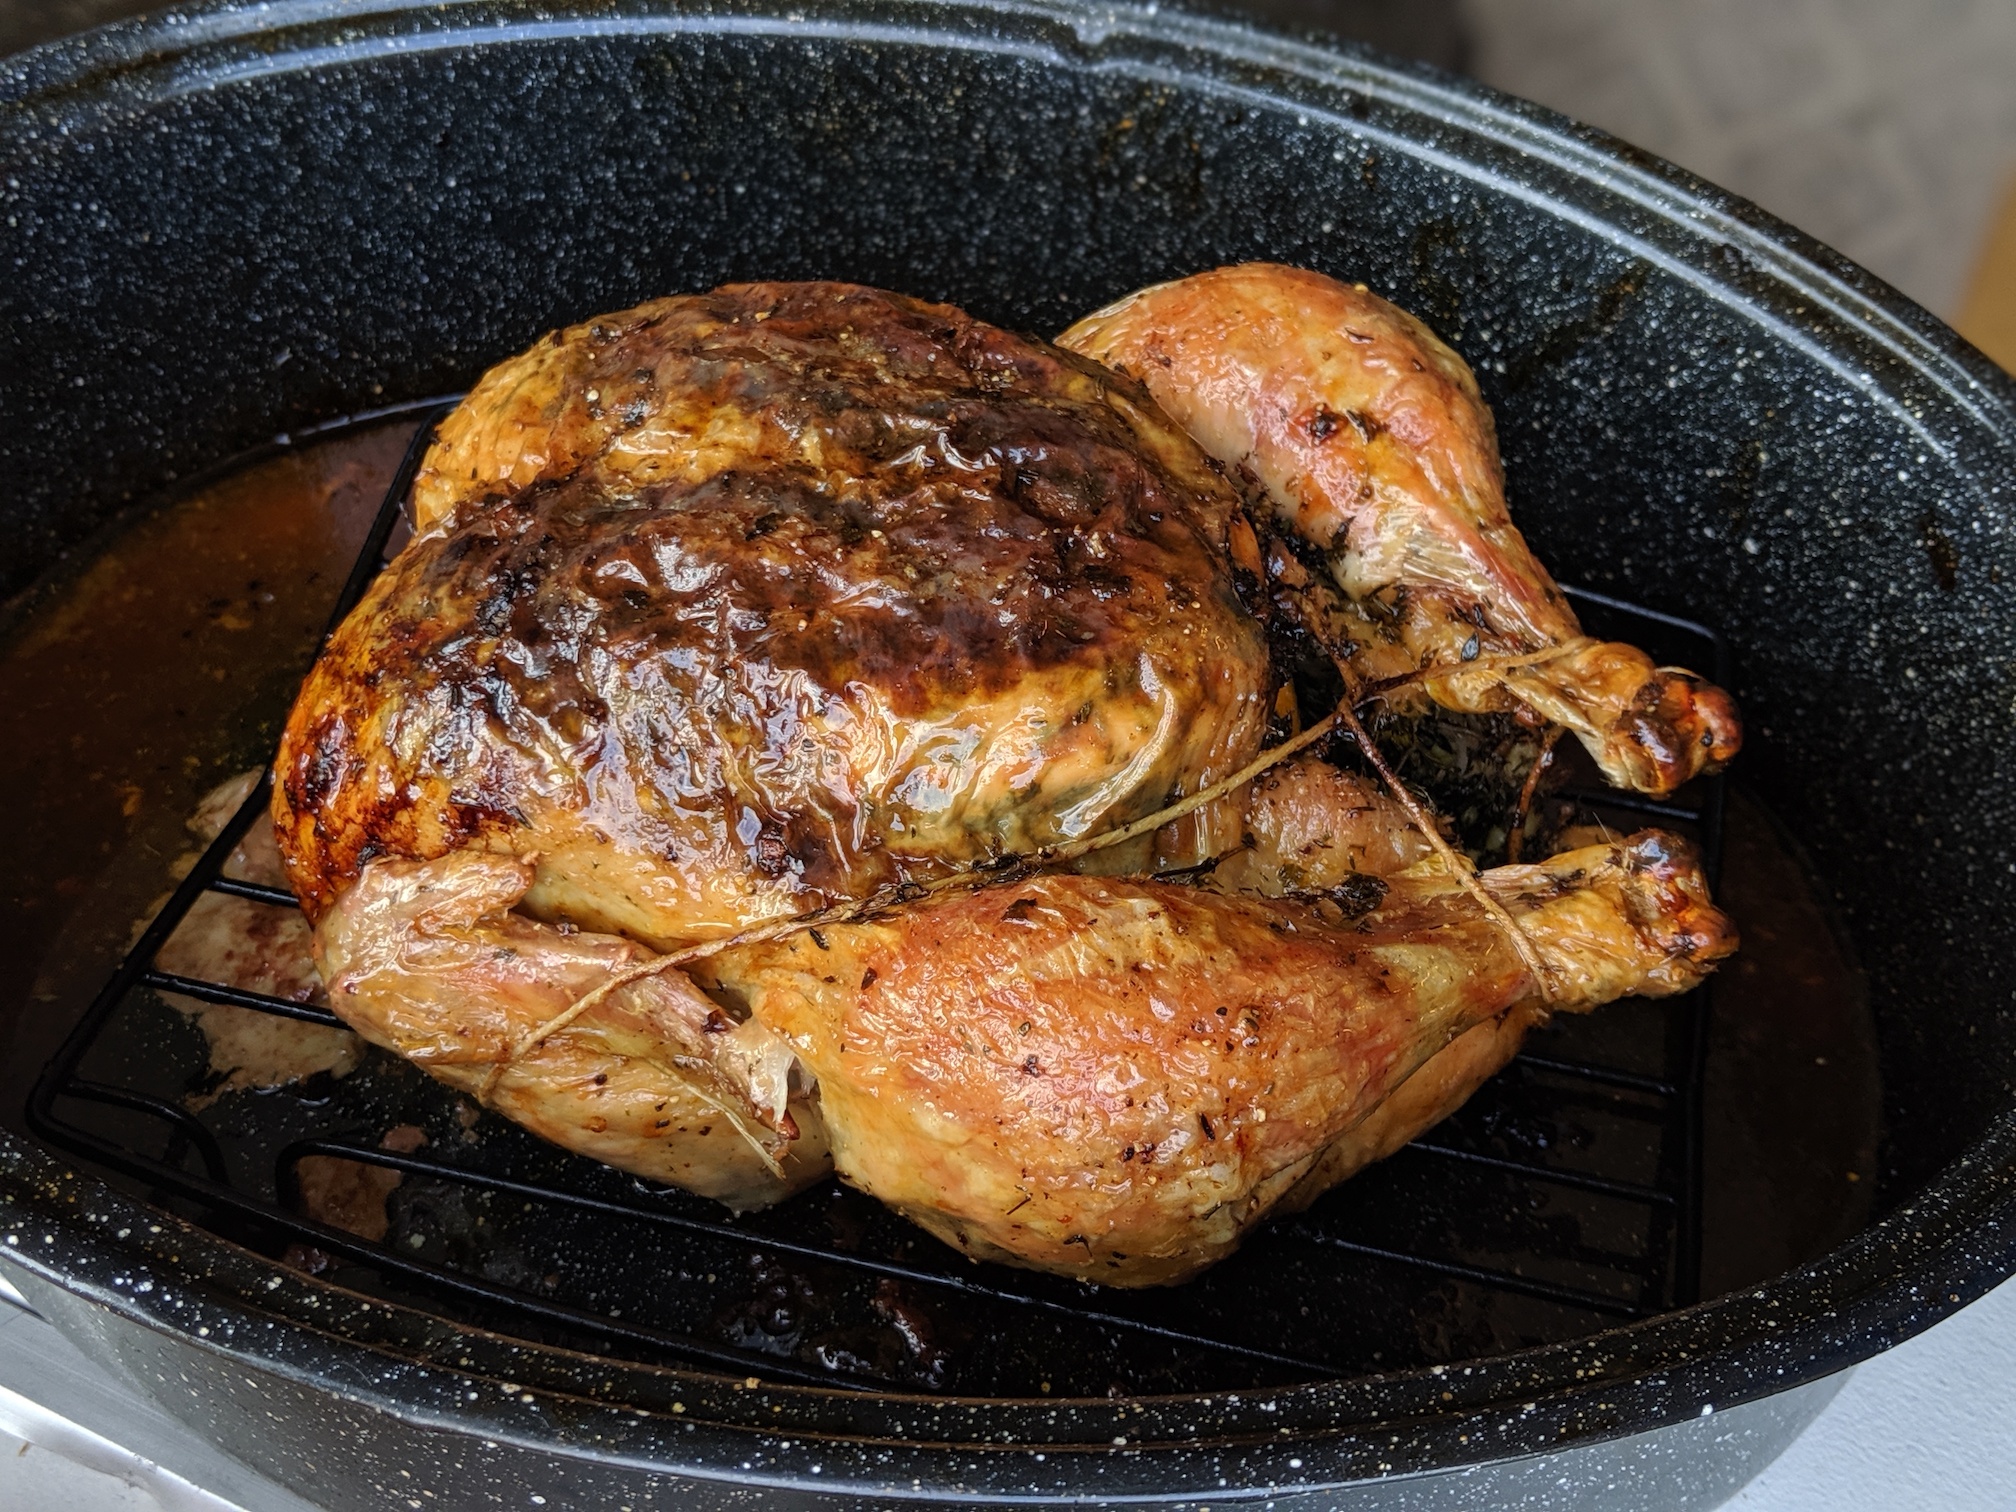 a golden brown roasted chicken in a roasting pan